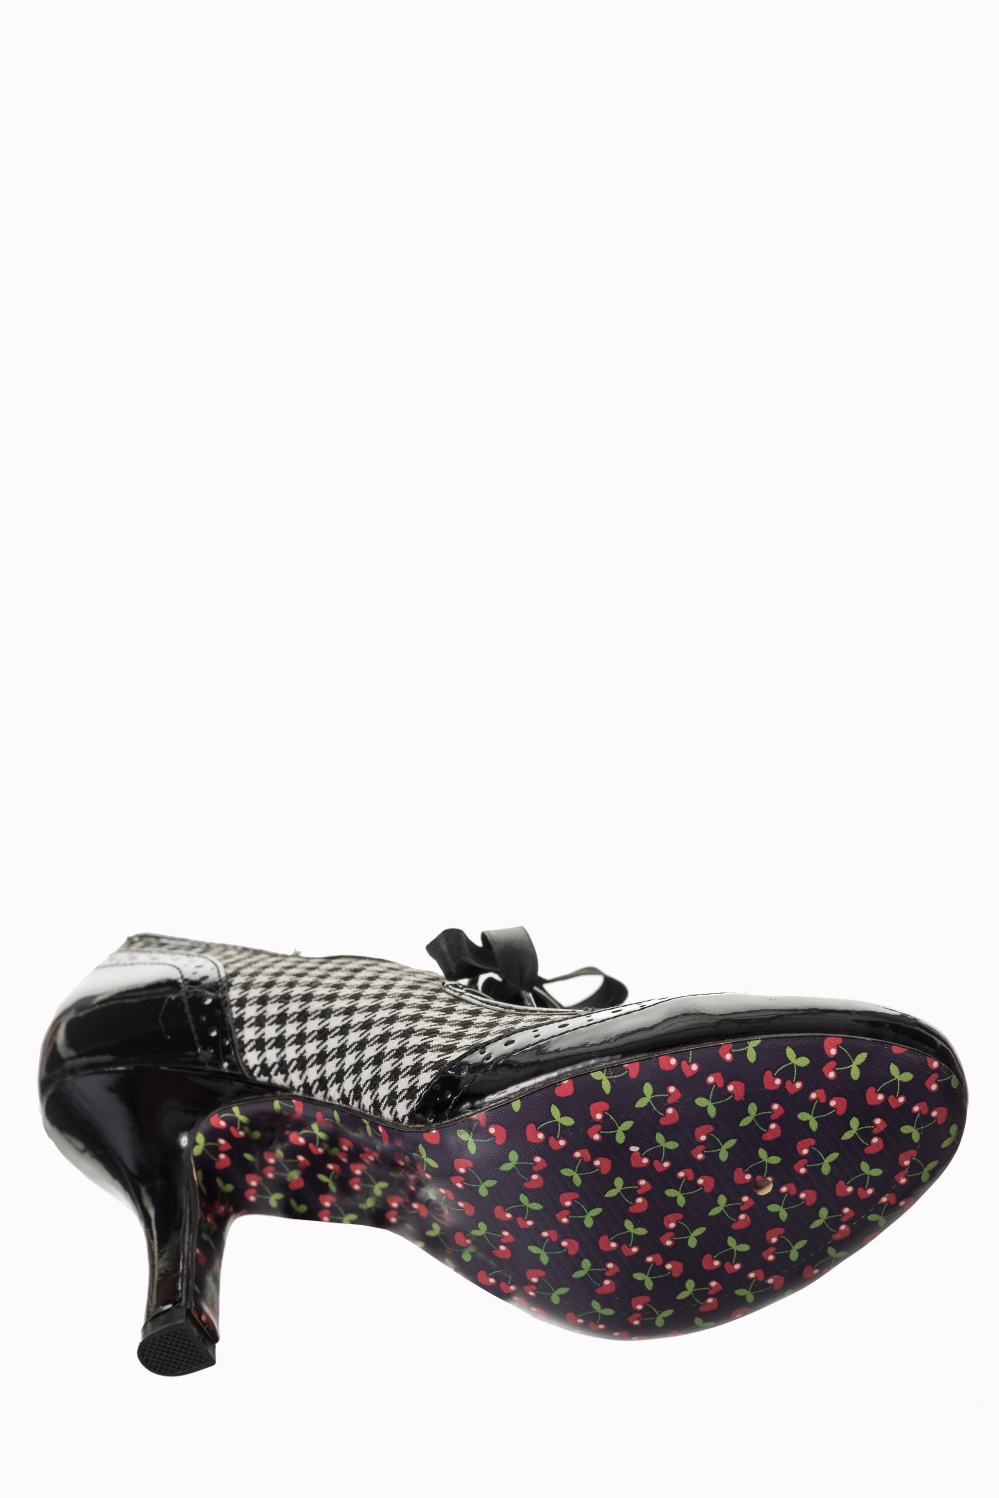 Dancing Days Houndstooth 50s Shoes